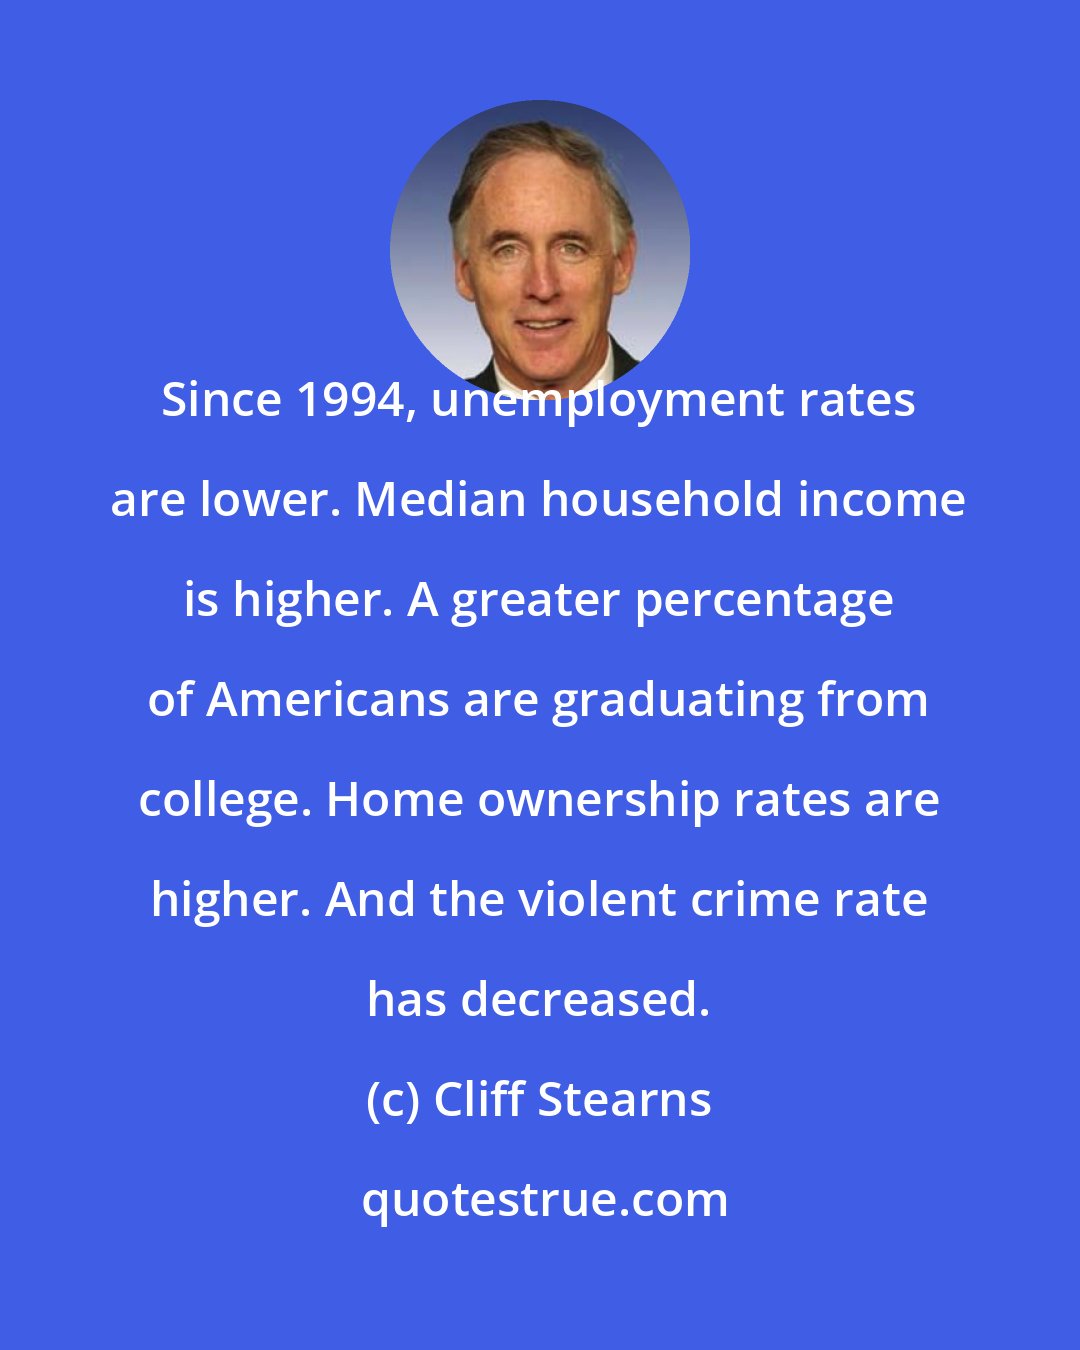 Cliff Stearns: Since 1994, unemployment rates are lower. Median household income is higher. A greater percentage of Americans are graduating from college. Home ownership rates are higher. And the violent crime rate has decreased.